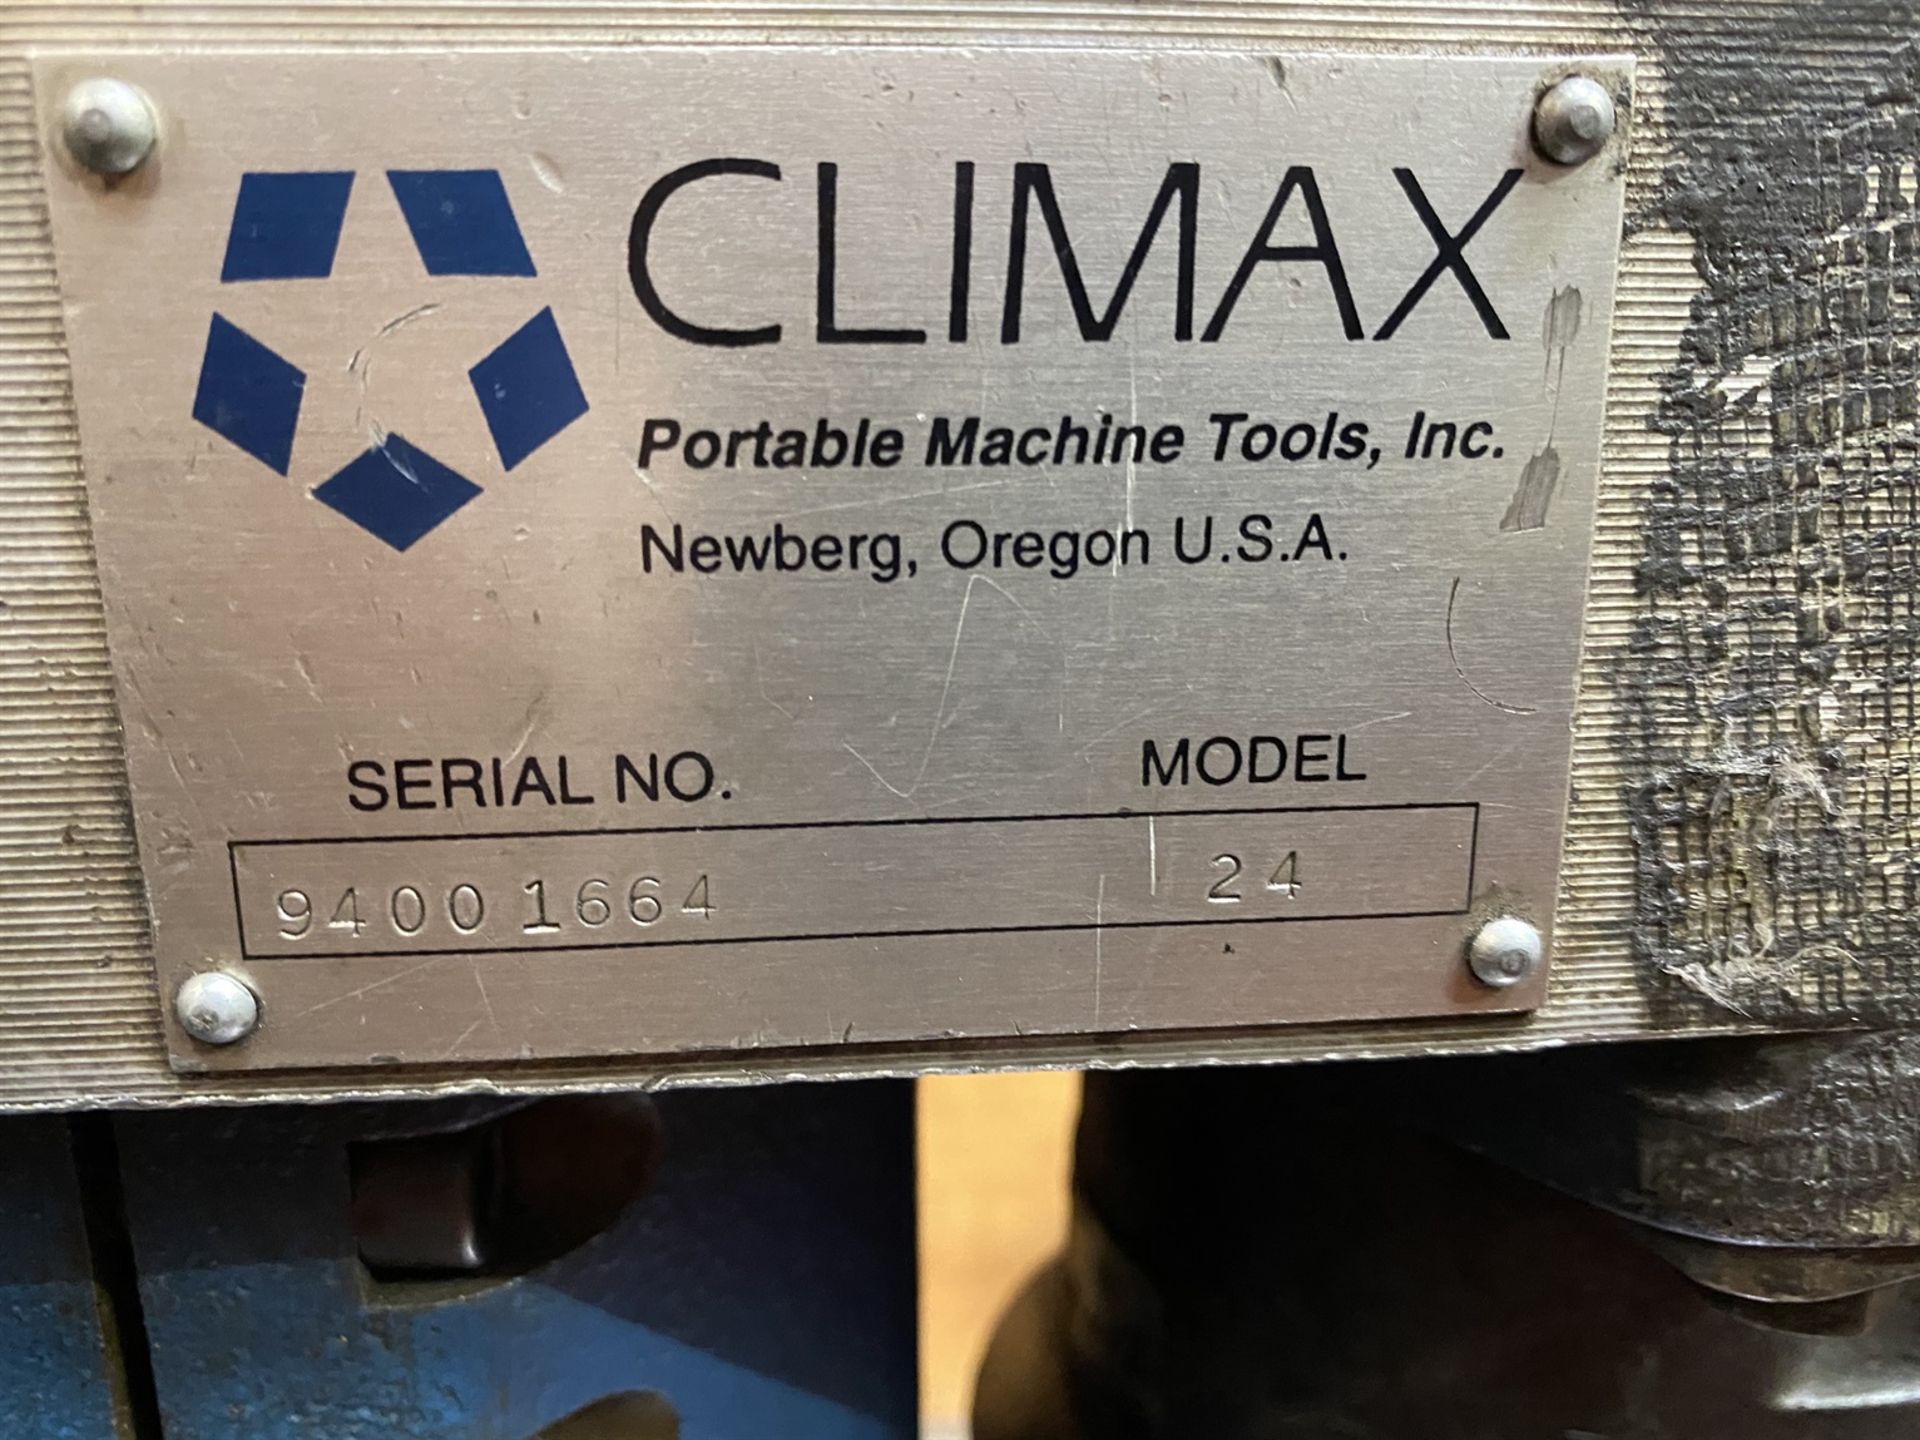 CLIMAX 24 Mid-Size Portable Milling Machine, s/n 94001664, w/ (2) Servo 150 Feeds, w/ Gang box - Image 7 of 7